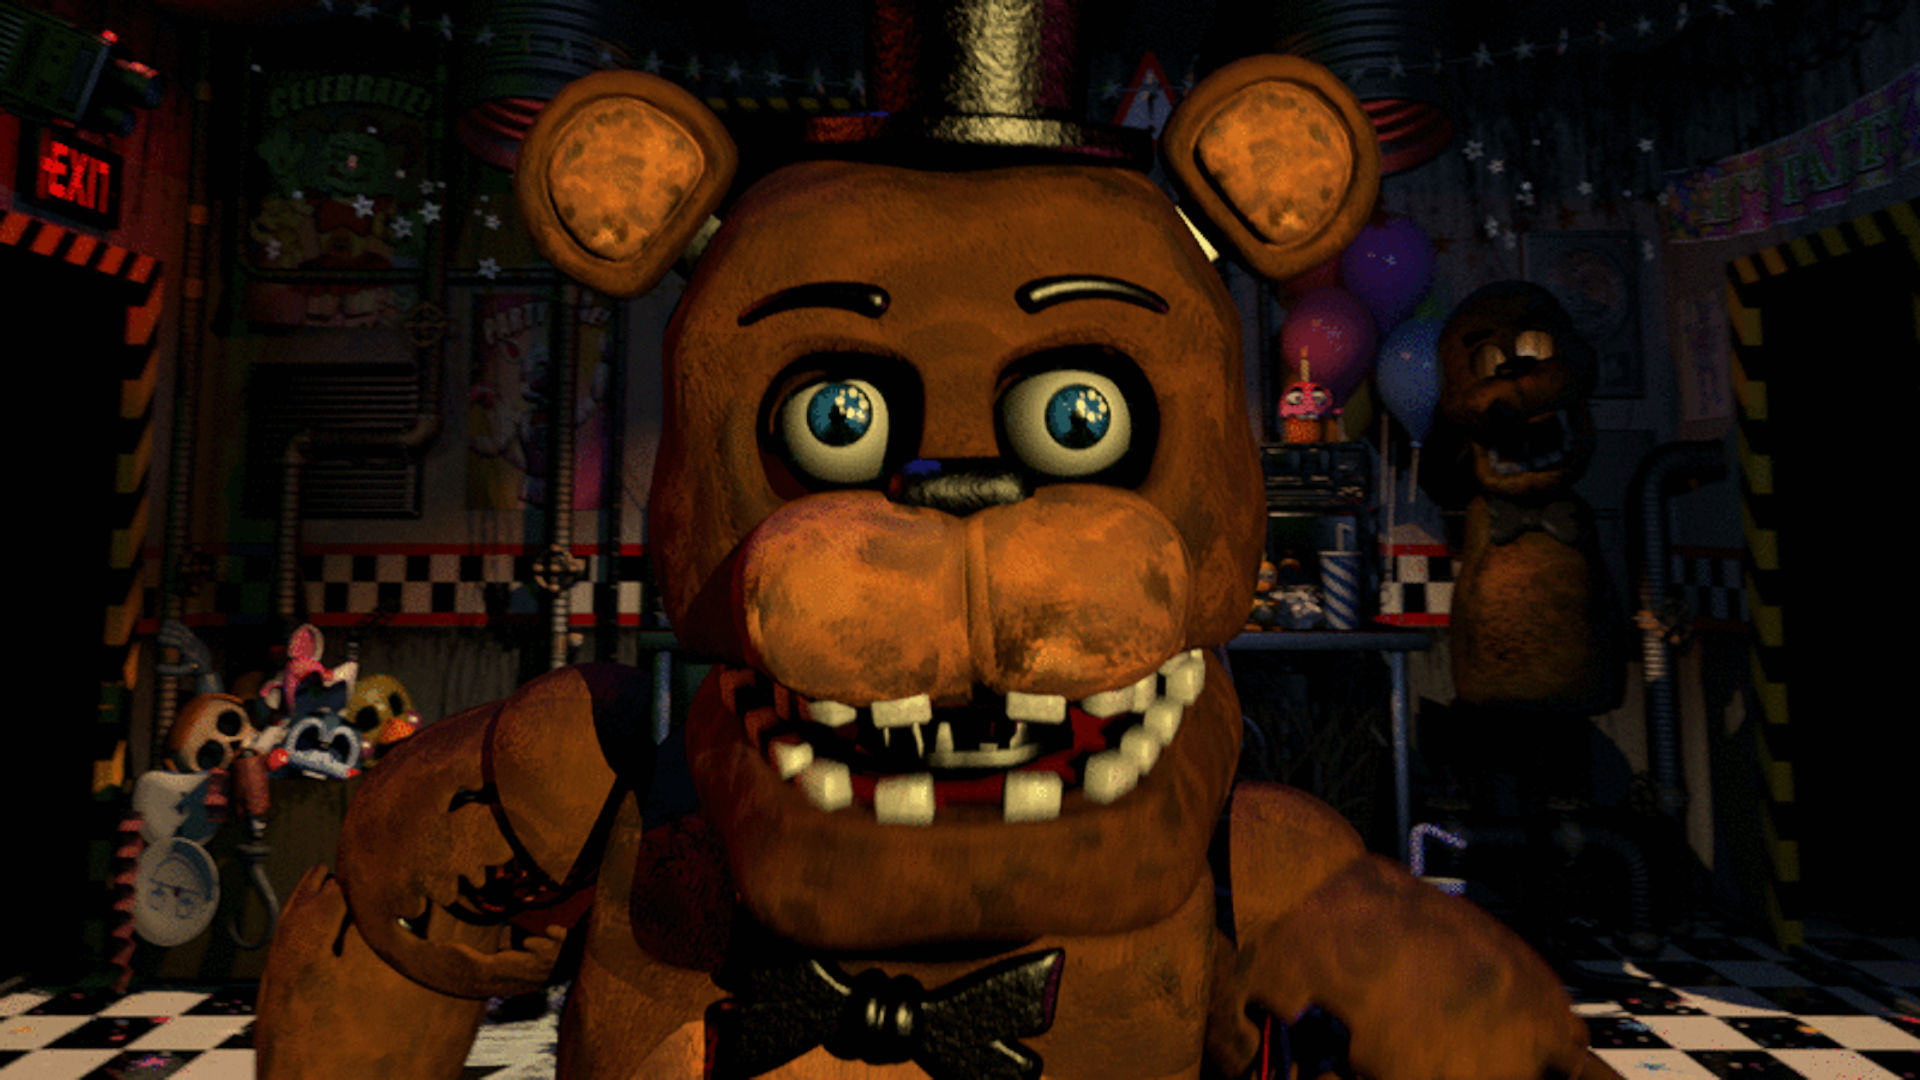 Stream Five Nights At Freddy's 1 gameplay part 1  (JUMPSCARES!SCREAMING!CURSSING!OH MY) by Rubye402